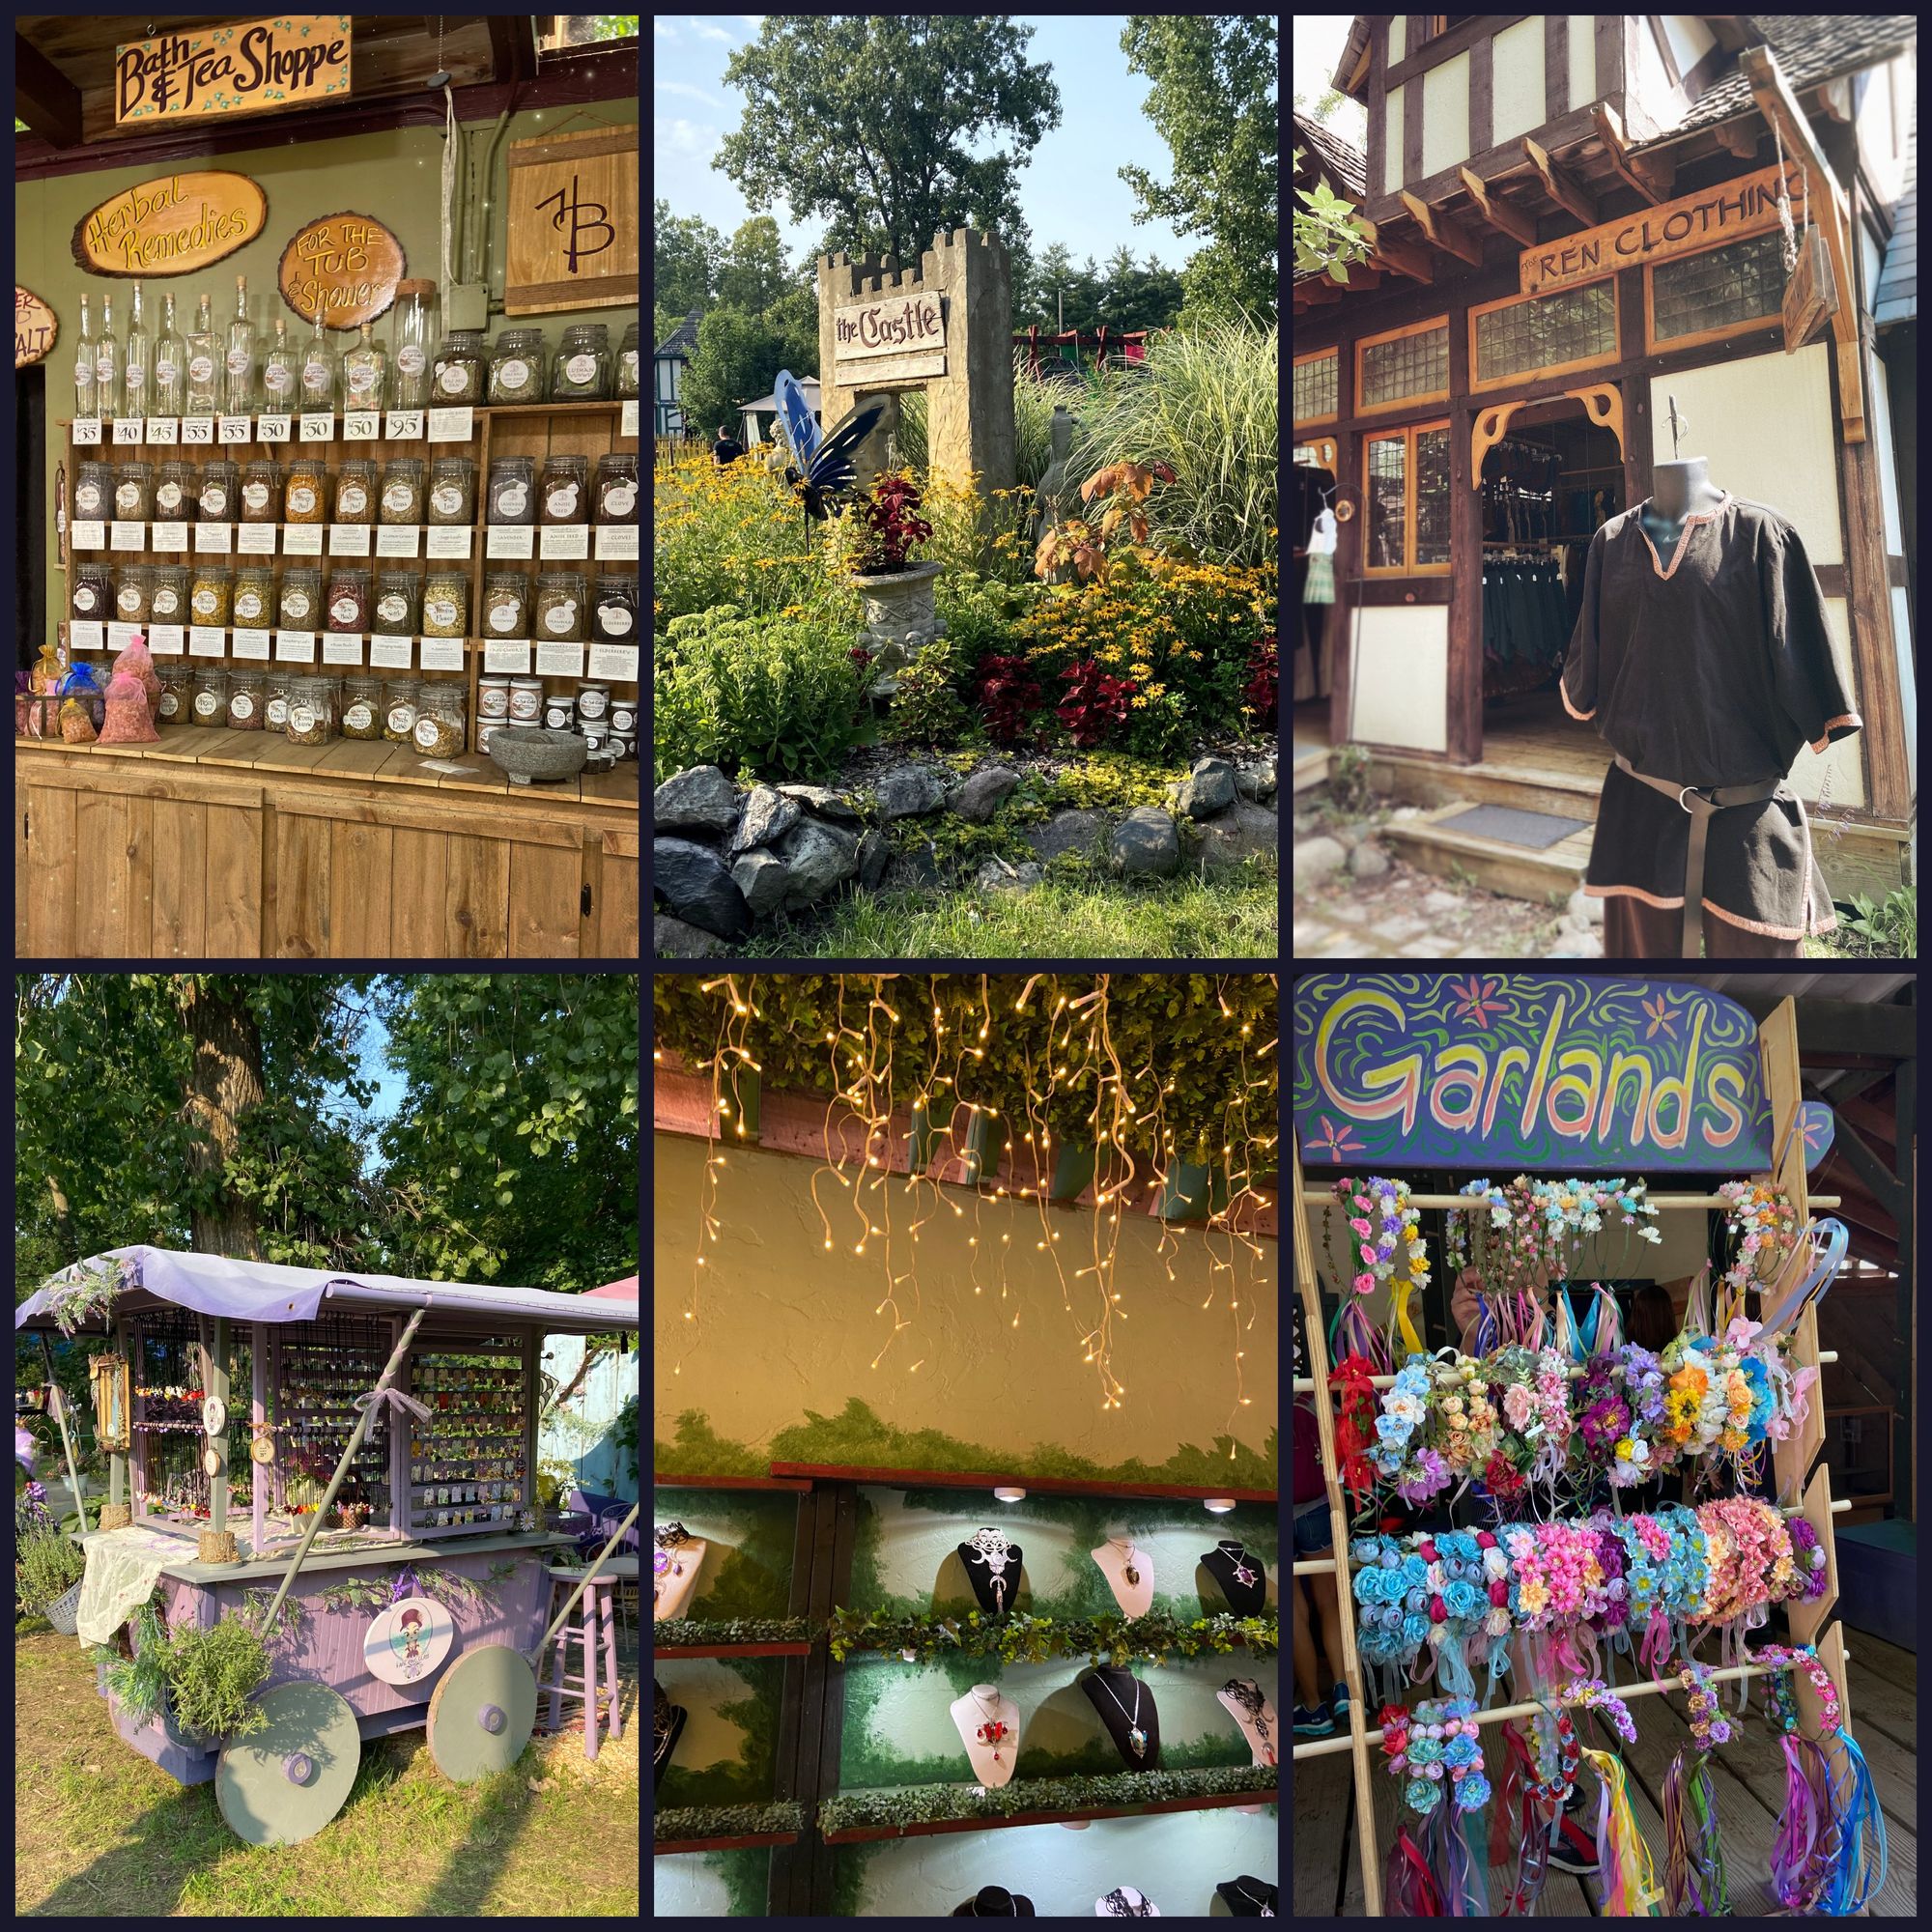 6 photos of the tea shop, the castle sign, the clothing shop, a jewelry cart, fairy-lights hanging from the ceiling, and a rack of flower crowns